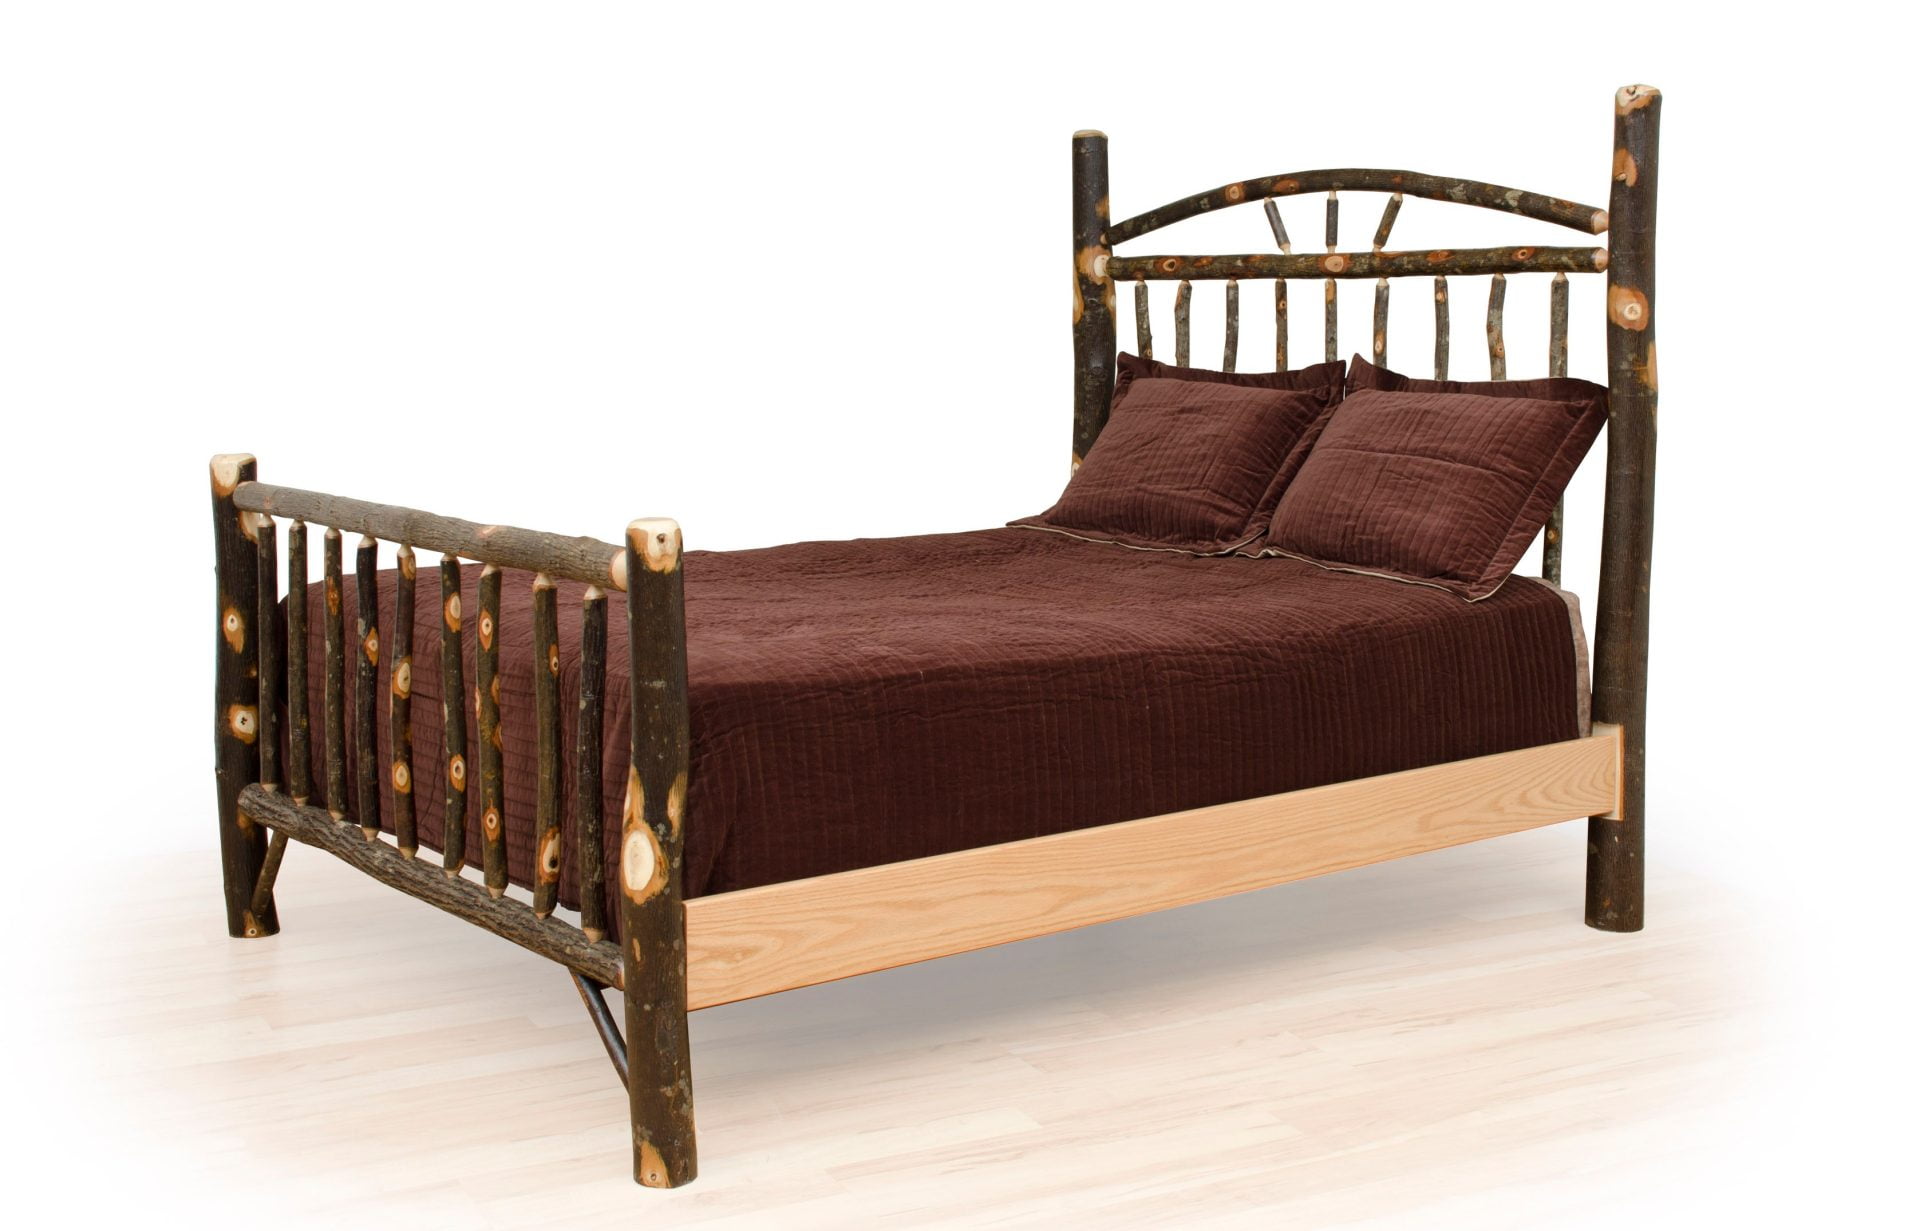 Rustic Hickory Bed - Wagon Wheel - Headboard Only - Twin / Full / Queen / King